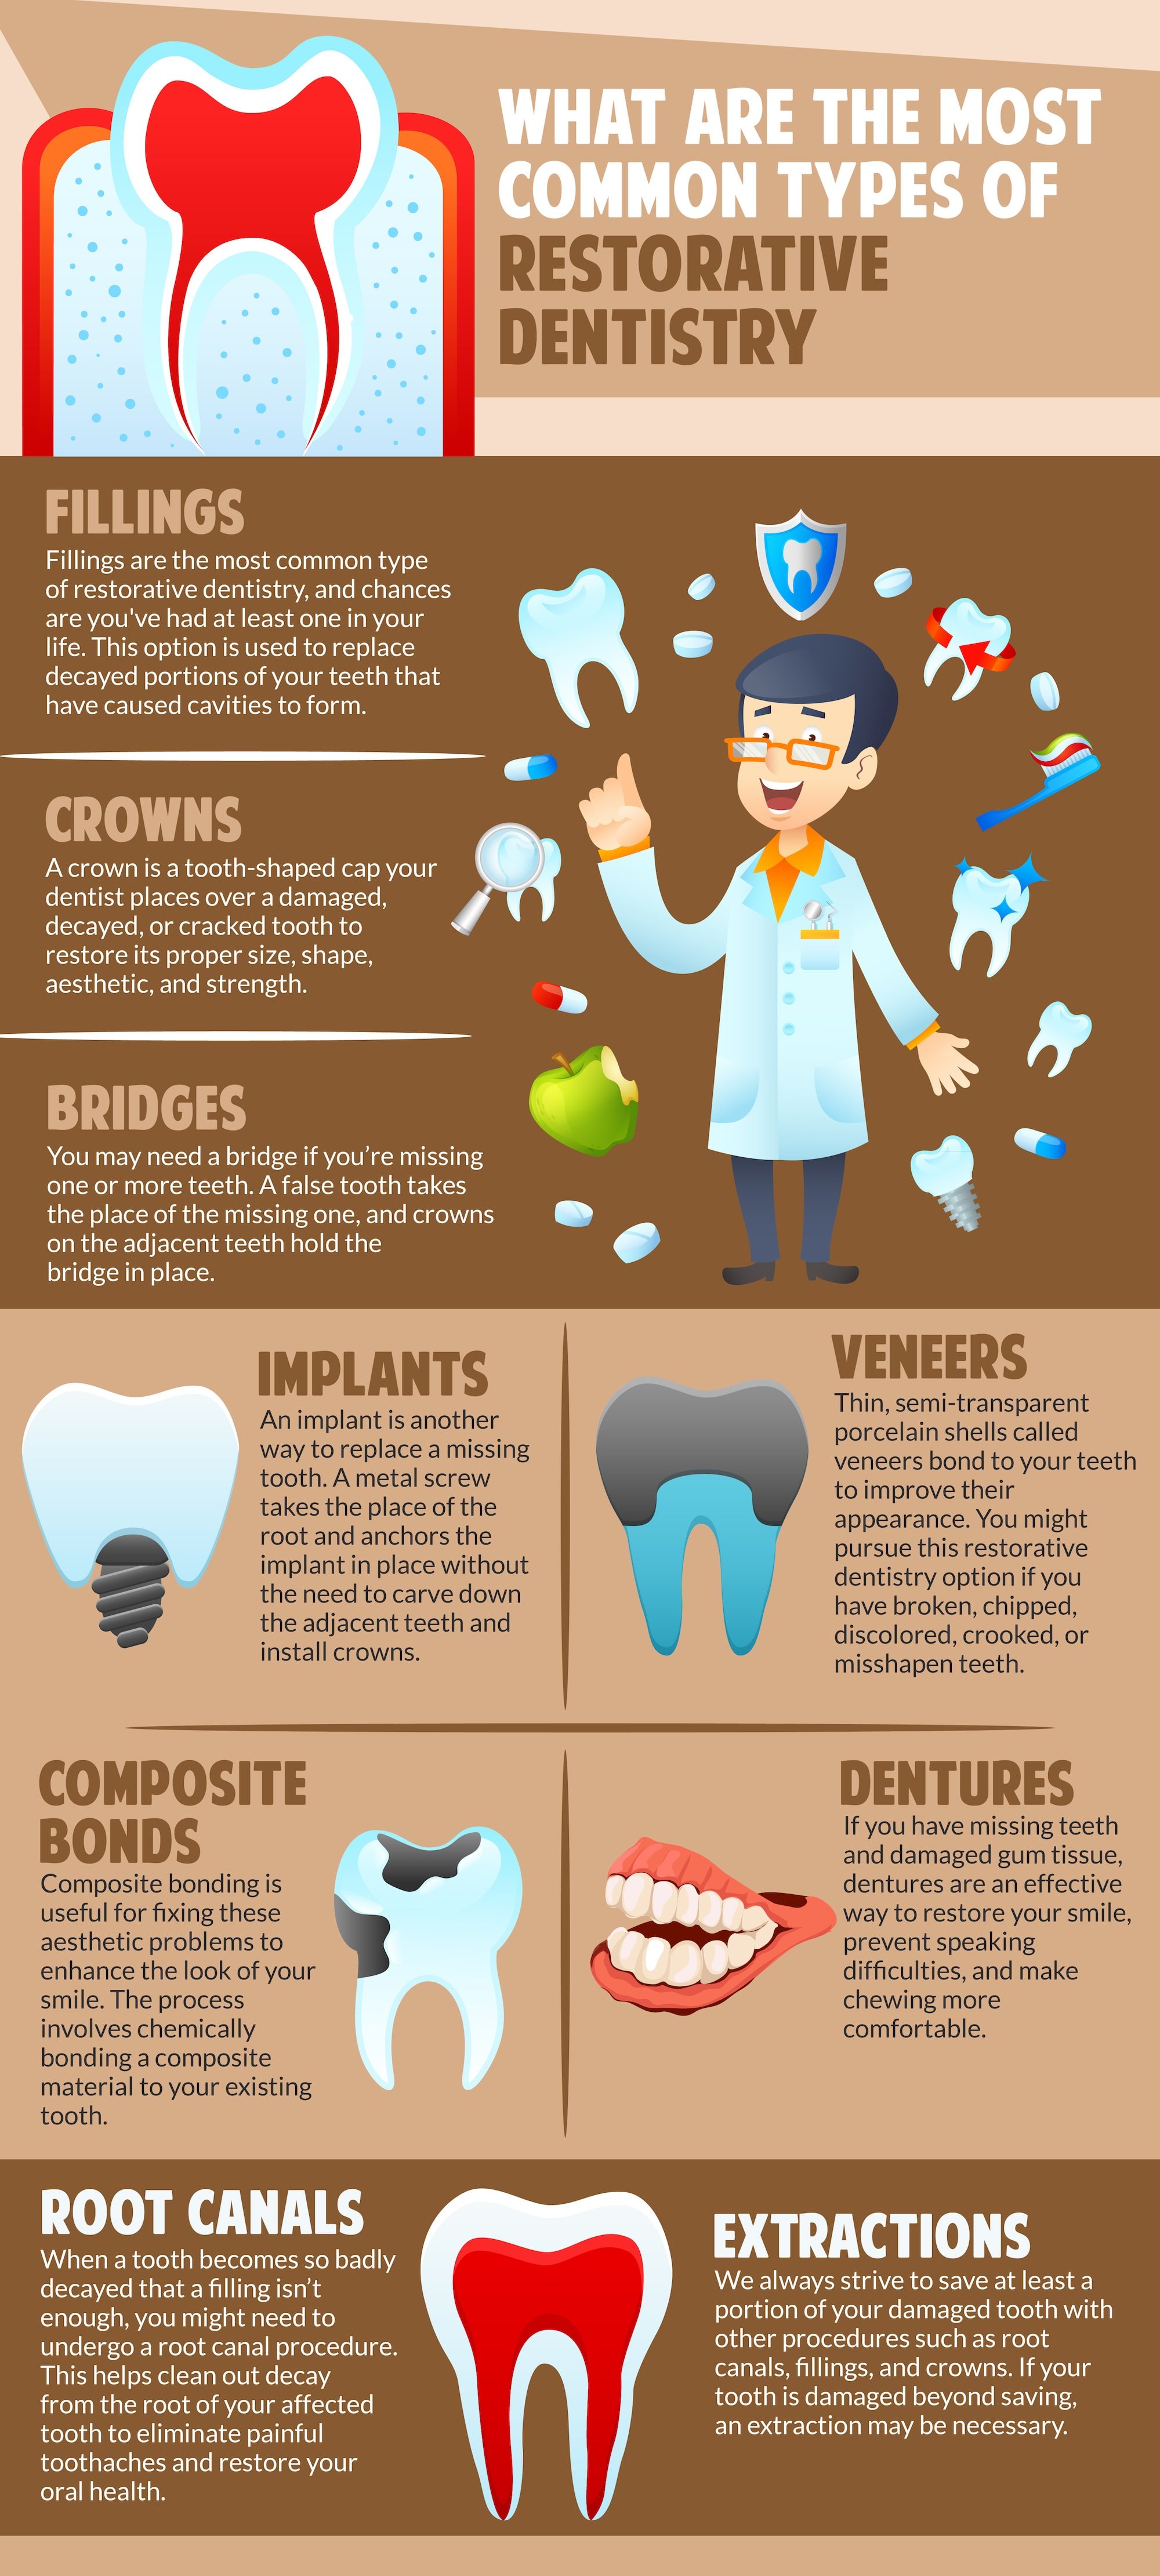 What are the most common types of restorative dentistry?